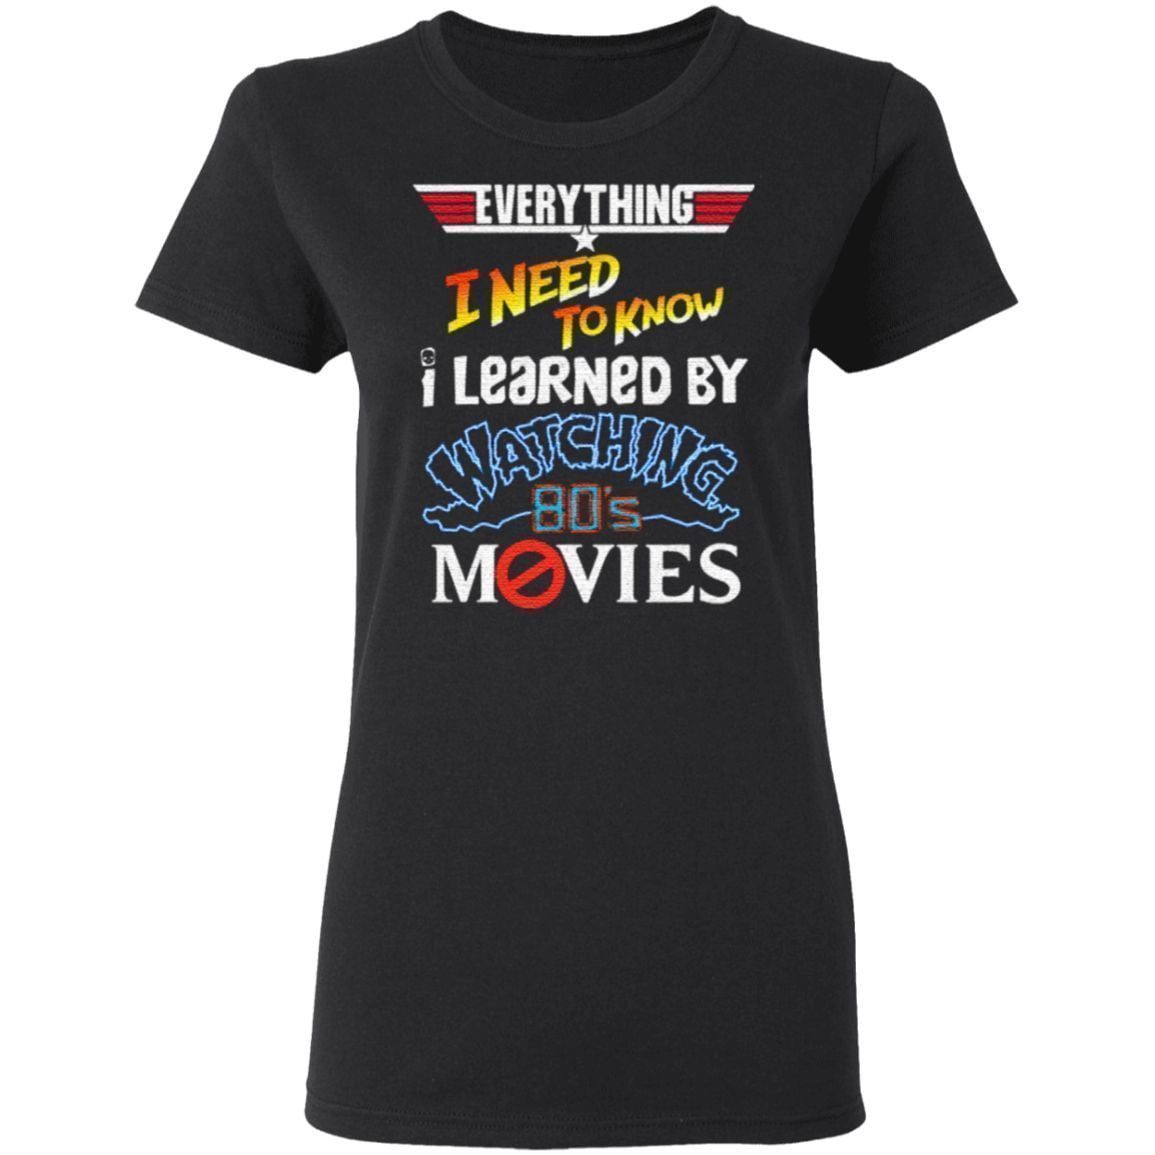 Everything I Need To Know I Learned By Watching 80’s Movies T Shirt